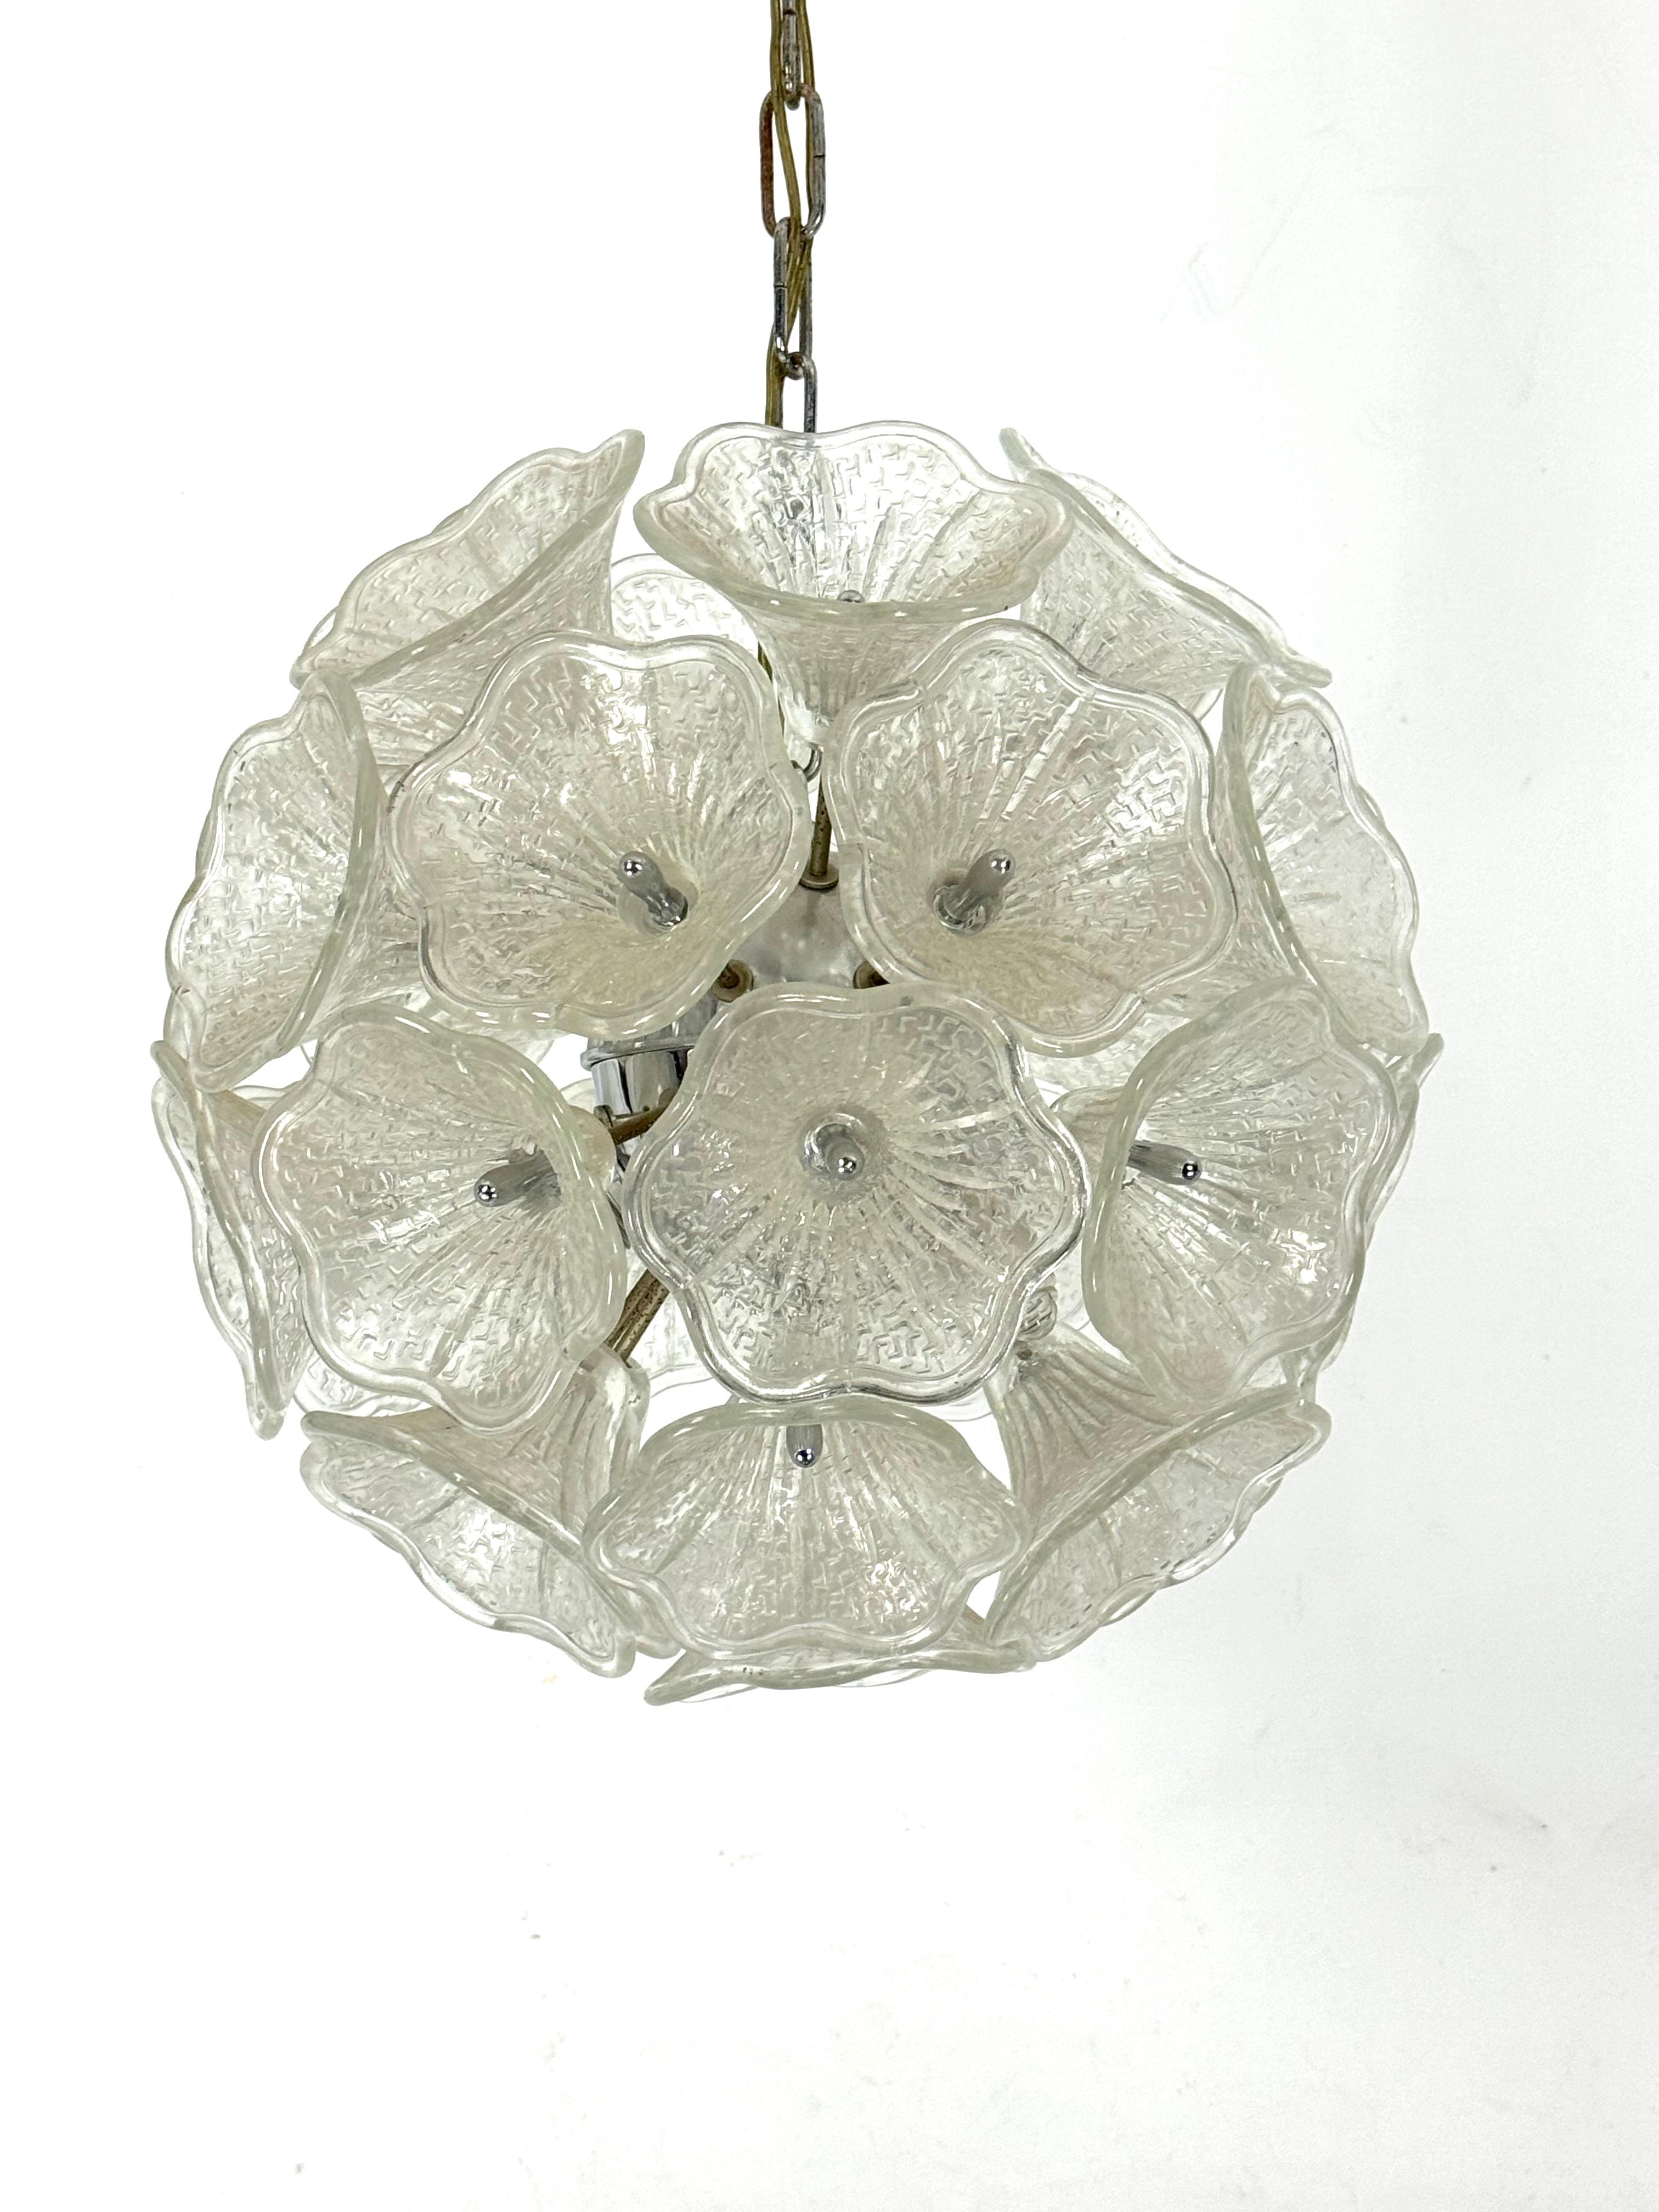 Very good vintage condition with normal trace of age and use for this Murano glass element chandelier in the manner of Venini. No chips or cracks. Produced in Italy during the 70s. Full working with EU standard, adaptable on demand for USA standard.
